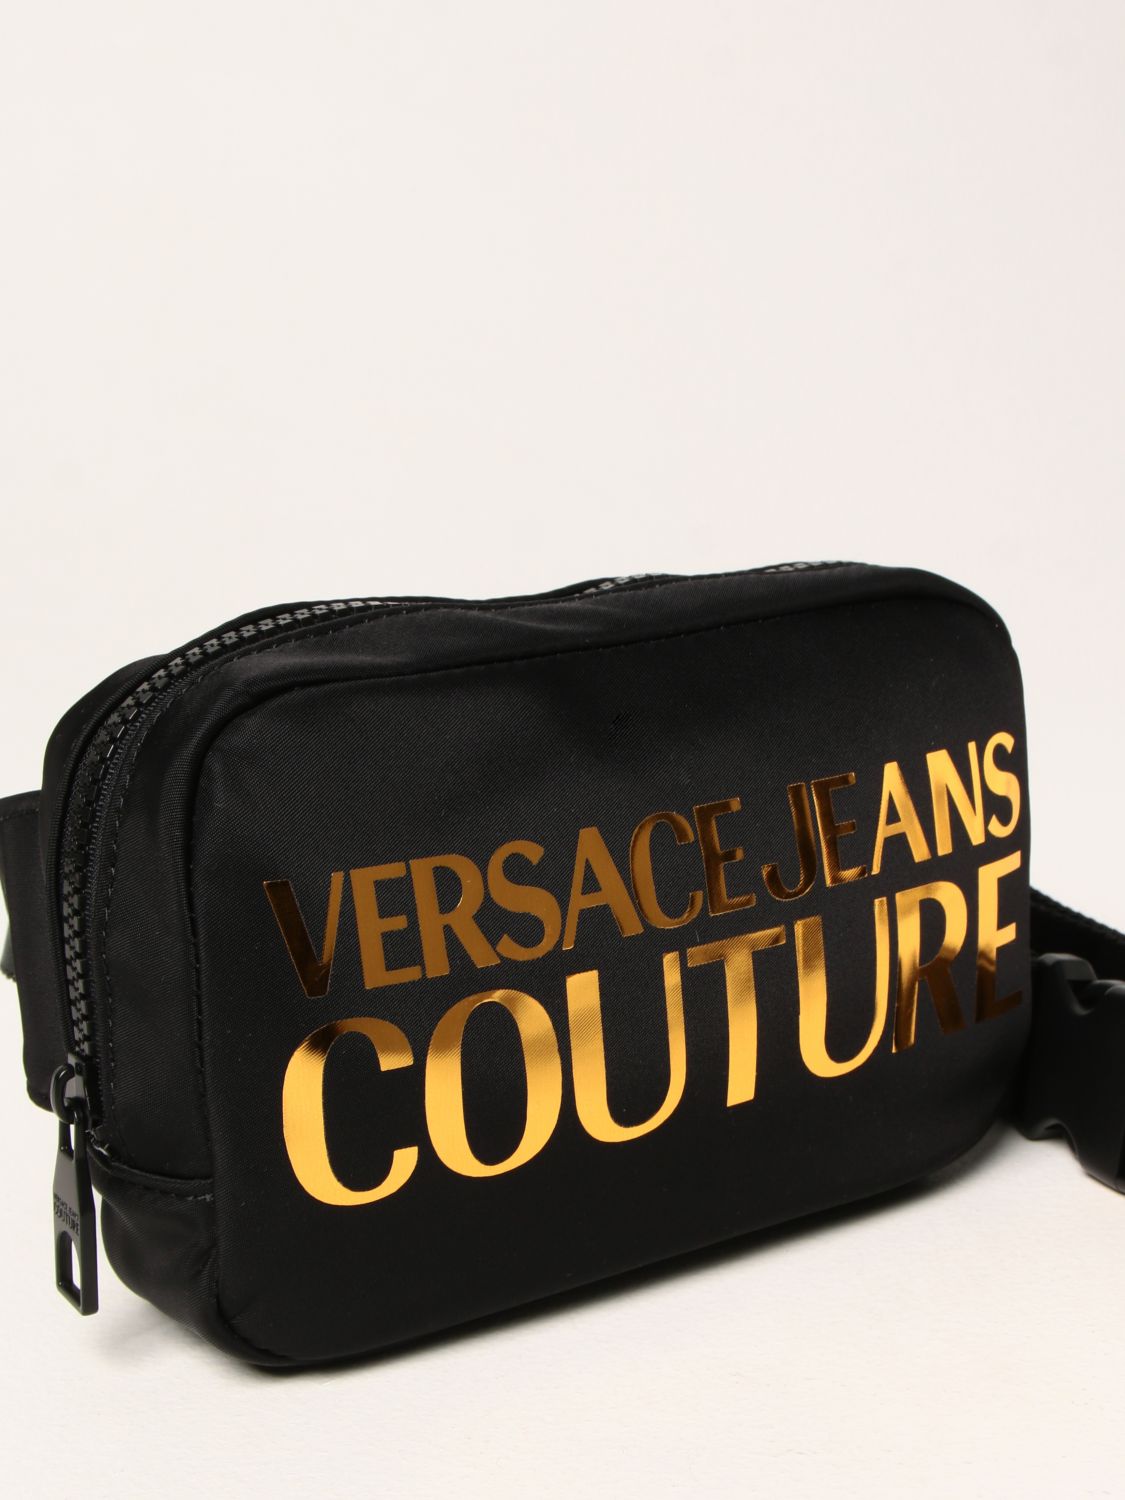 Versace Jeans Couture nylon belt bag with logo